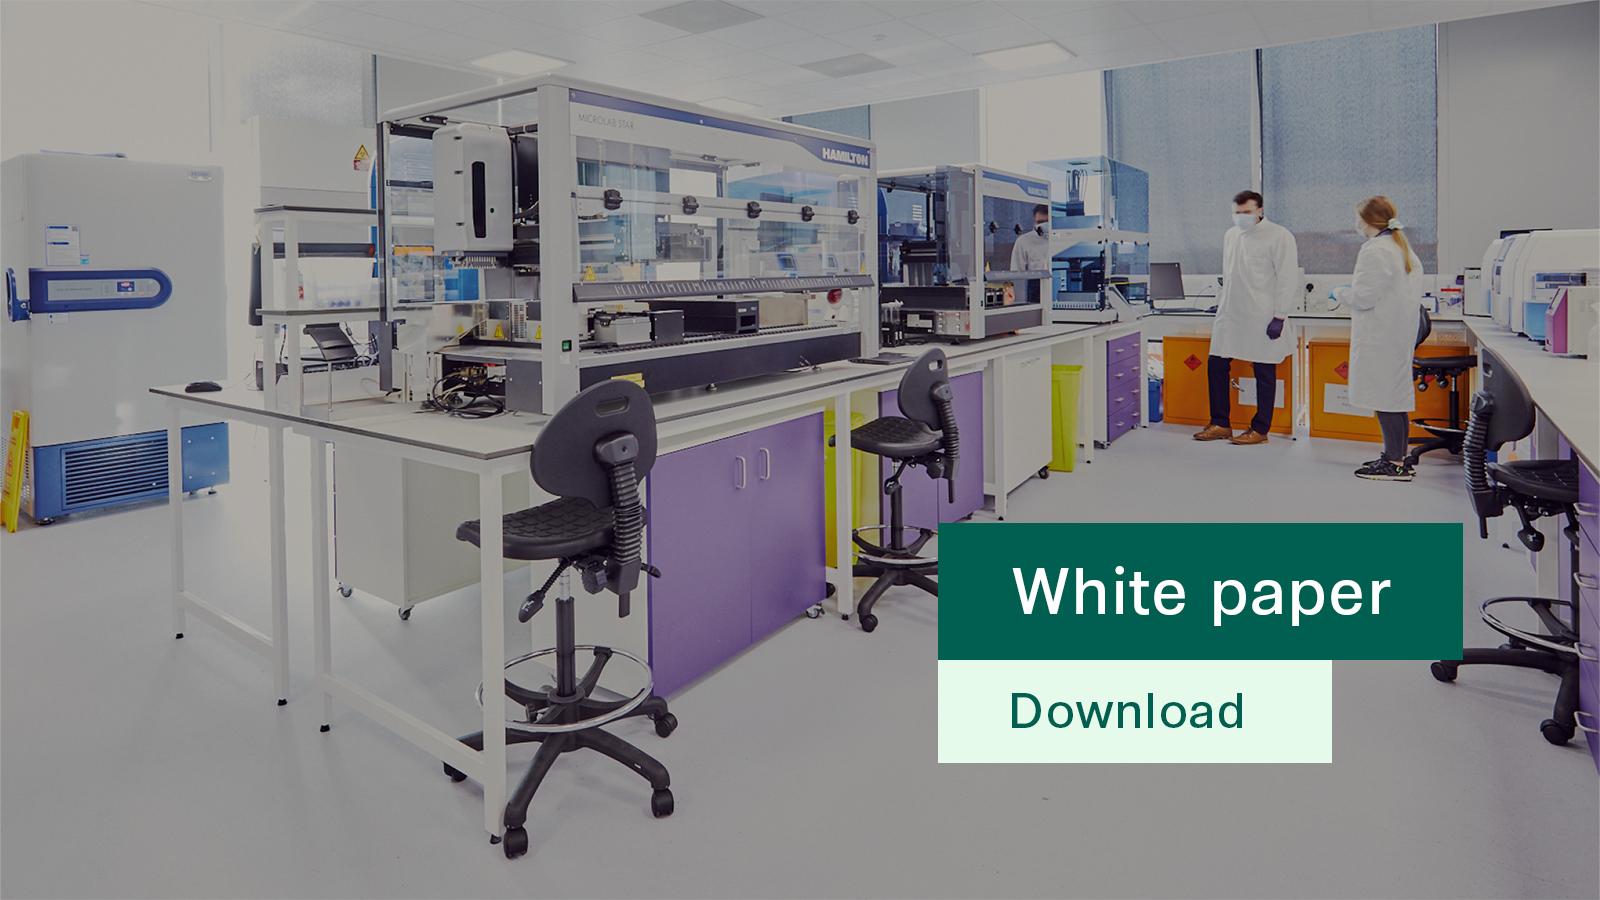 Bruntwood SciTech white paper download